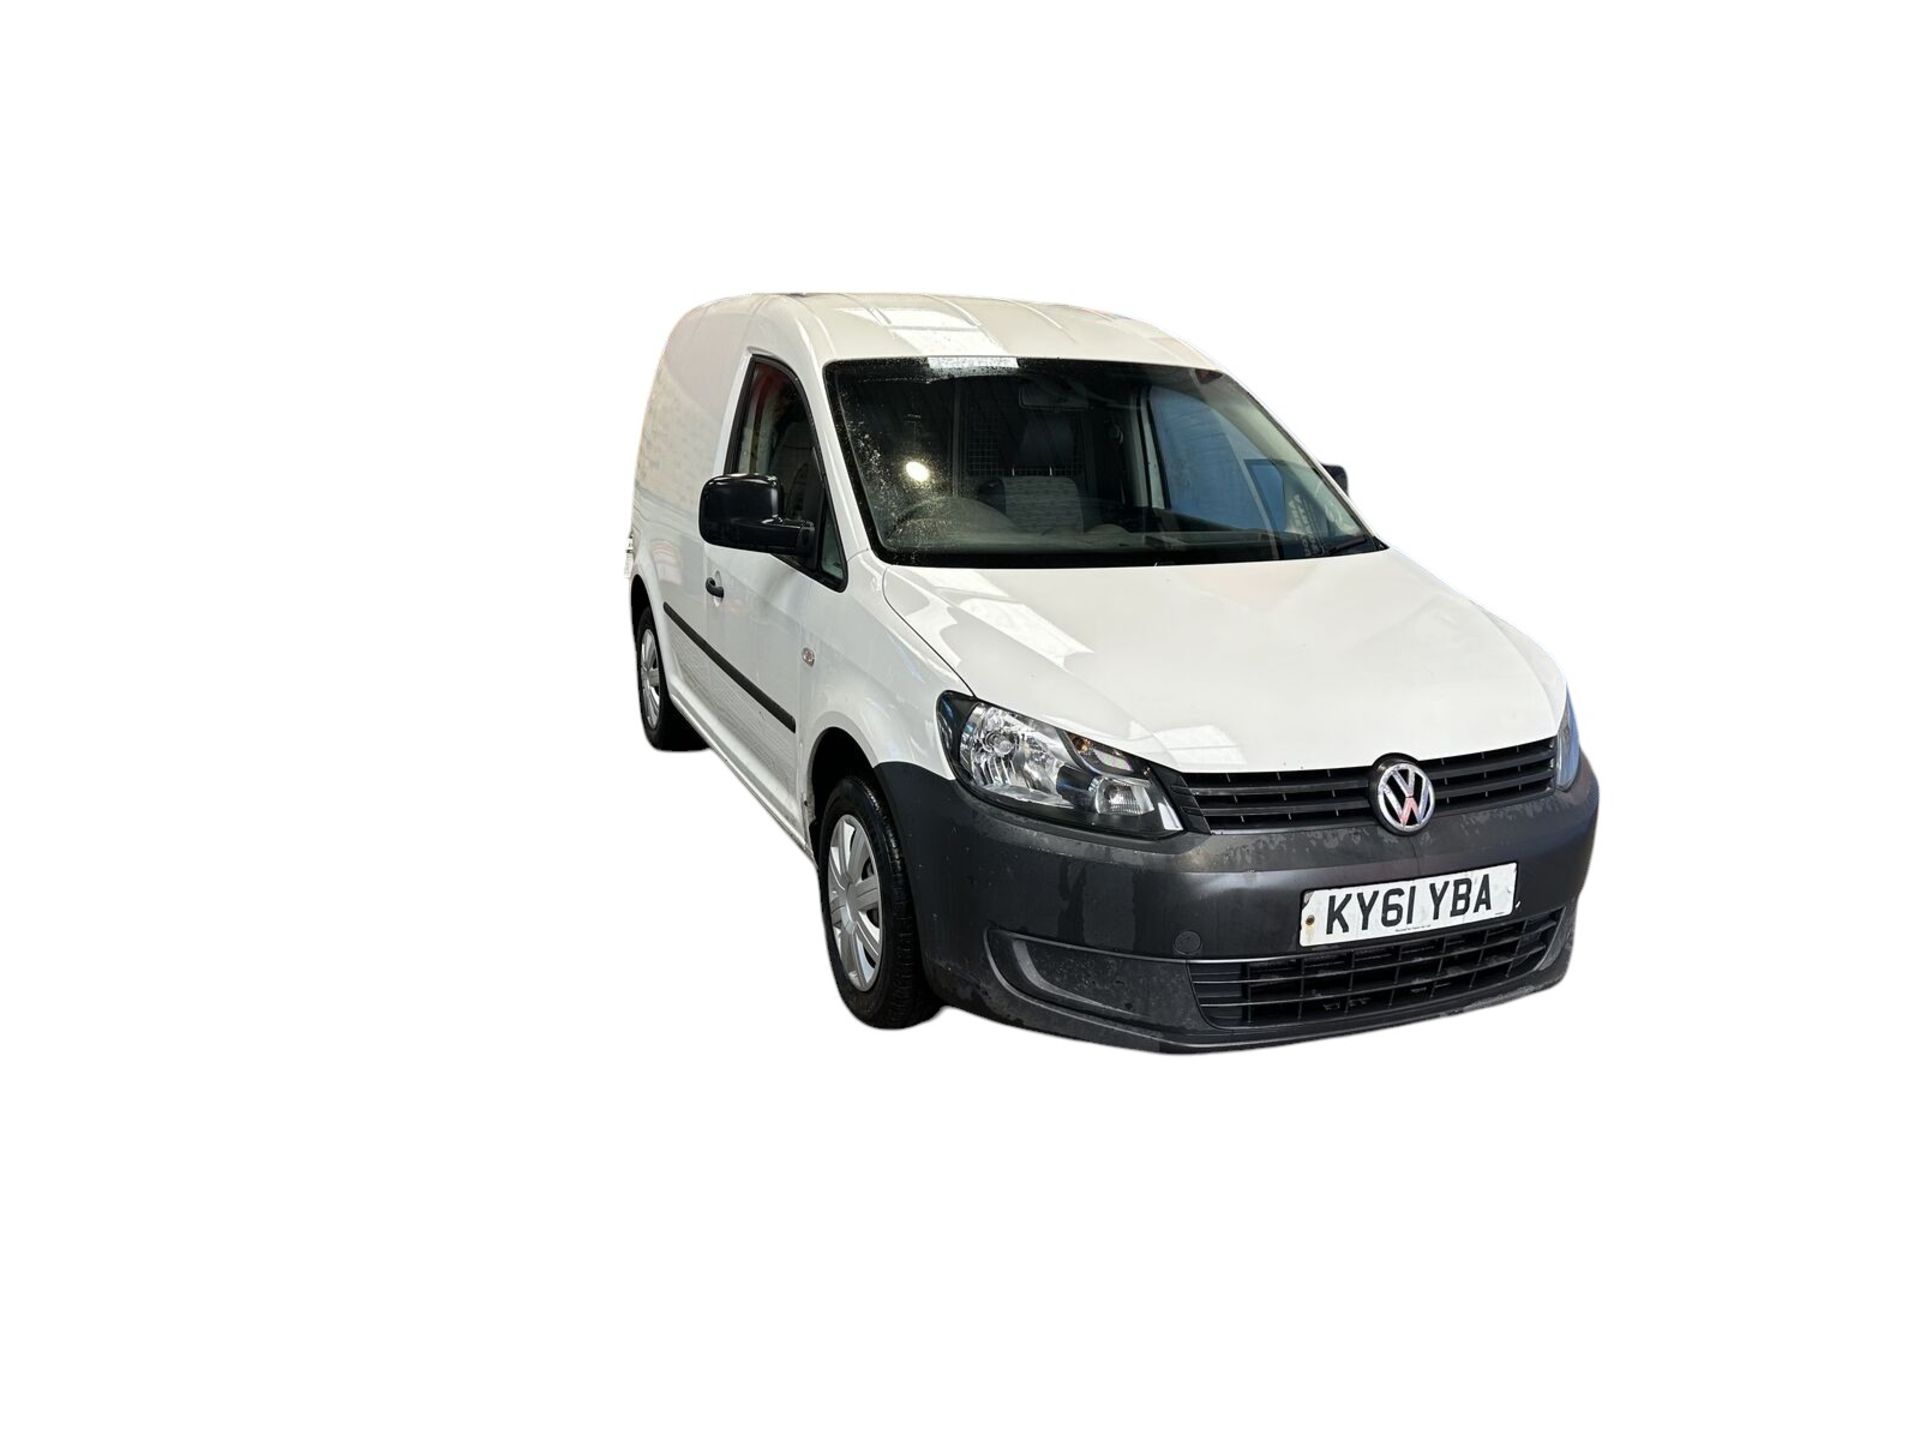 TOP GEAR DEAL: 61 PLATE VW CADDY TDI, CLEAN VAN, READY TO WORK >>--NO VAT ON HAMMER--<<